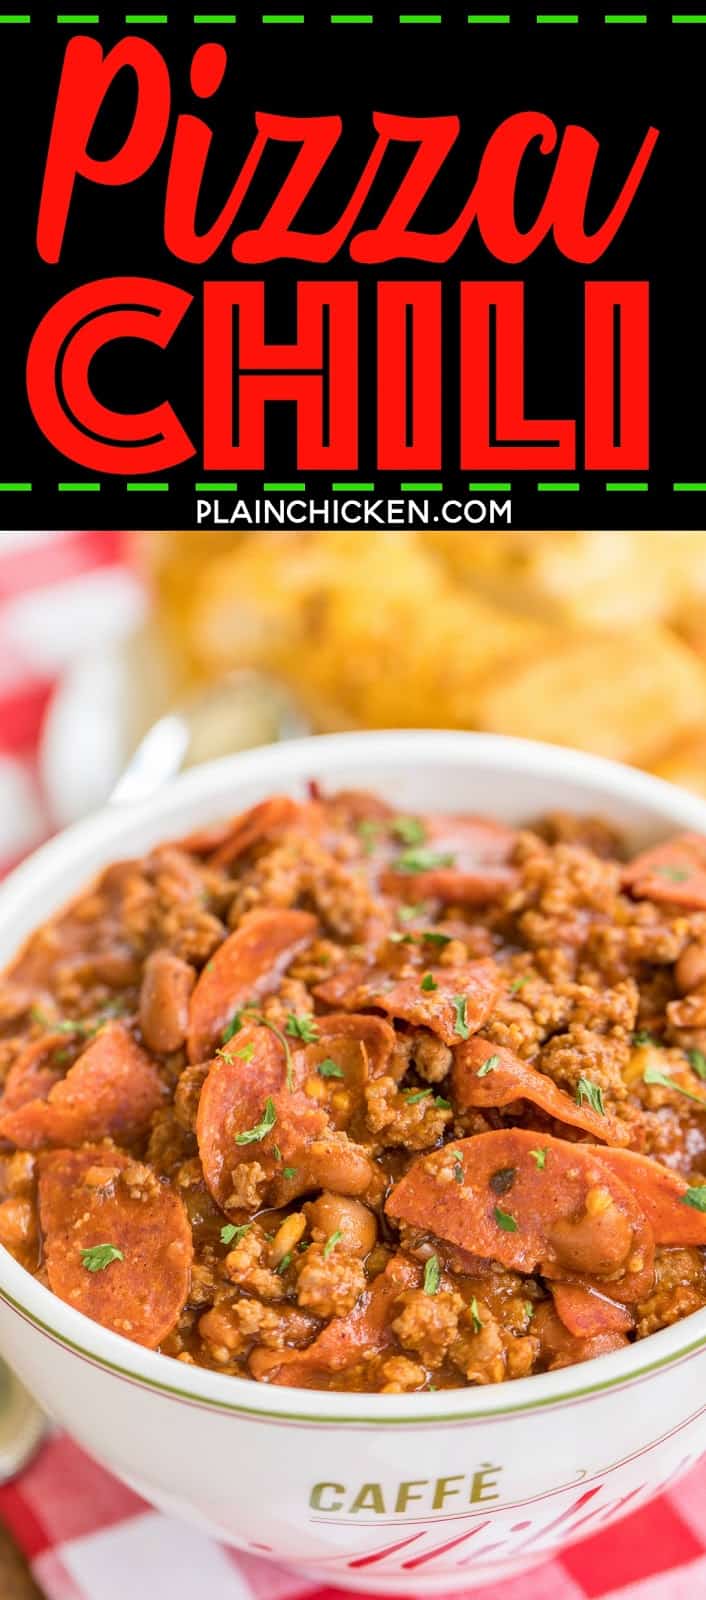 Pizza Chili - pizza and chili together in one delicious dish! Ground beef, sausage, pepperoni, garlic, salsa, pizza sauce, chili powder. Ready in about 30 minutes! Can also make in the slow cooker. Great for potlucks and tailgating! Top with mozzarella cheese or some ricotta cheese. Serve with some crusty garlic bread for a quick and easy meal that the whole family will LOVE!!! Freeze leftovers for a quick meal later!